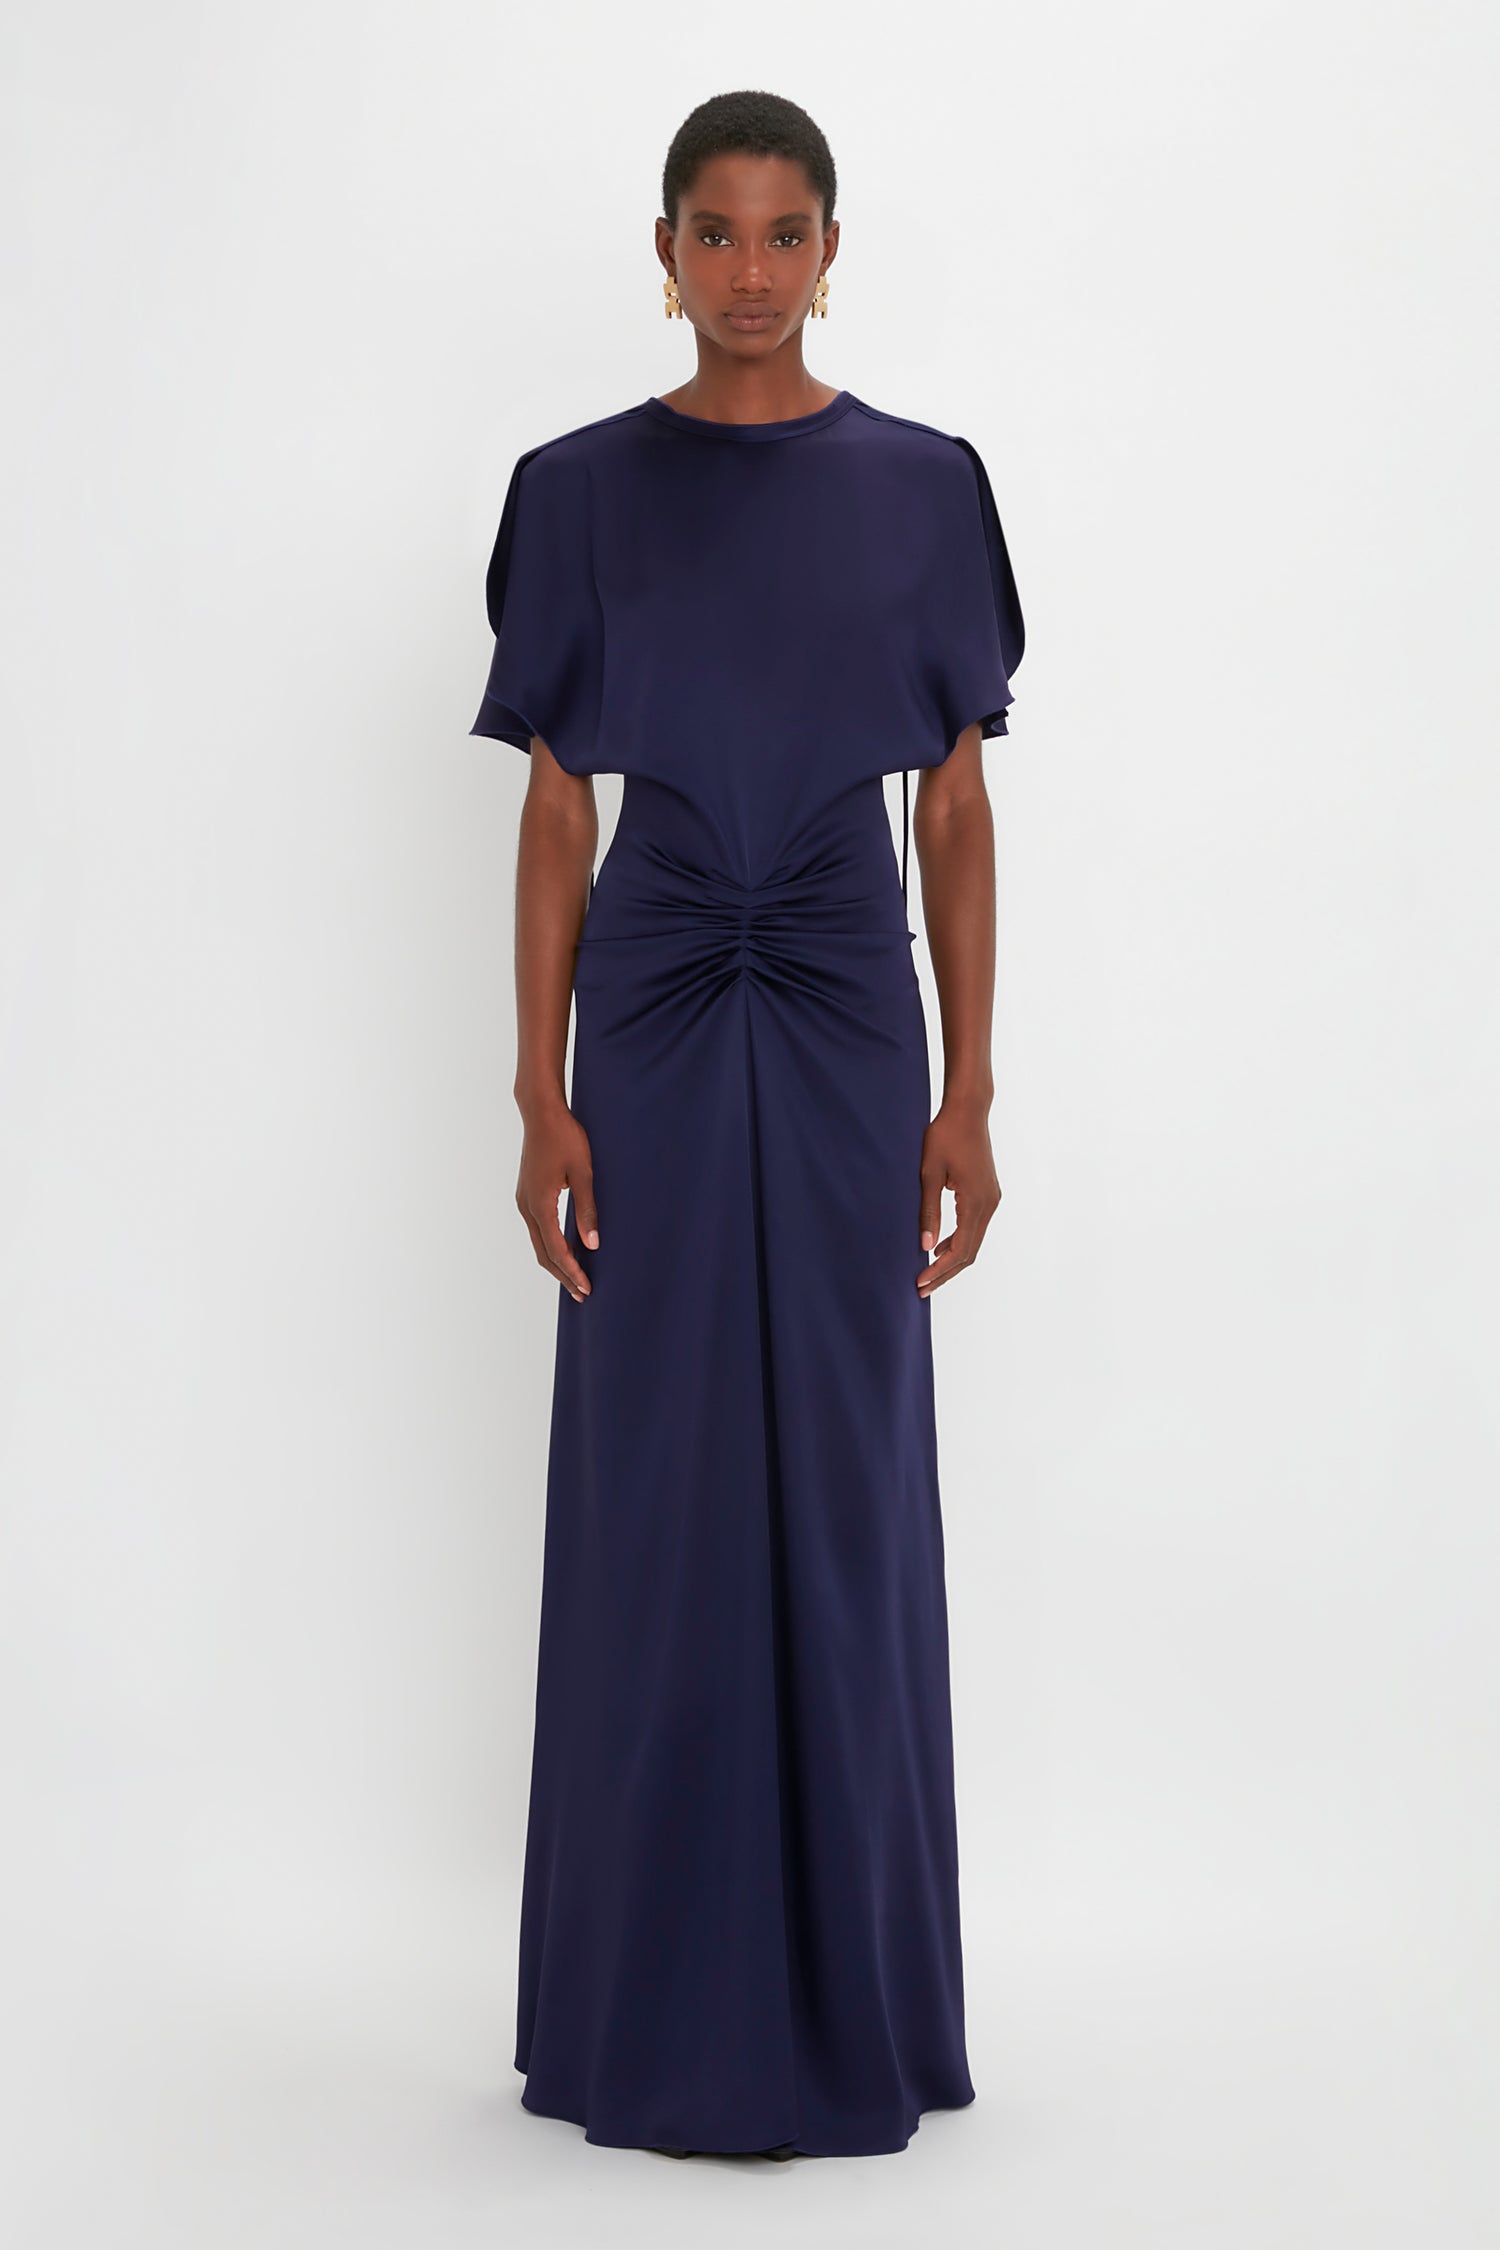 A person stands against a white background wearing a floor-length, navy blue dress with a knotted detail at the waist and Victoria Beckham's Exclusive Jumbo Chain Earrings in Brushed Gold.